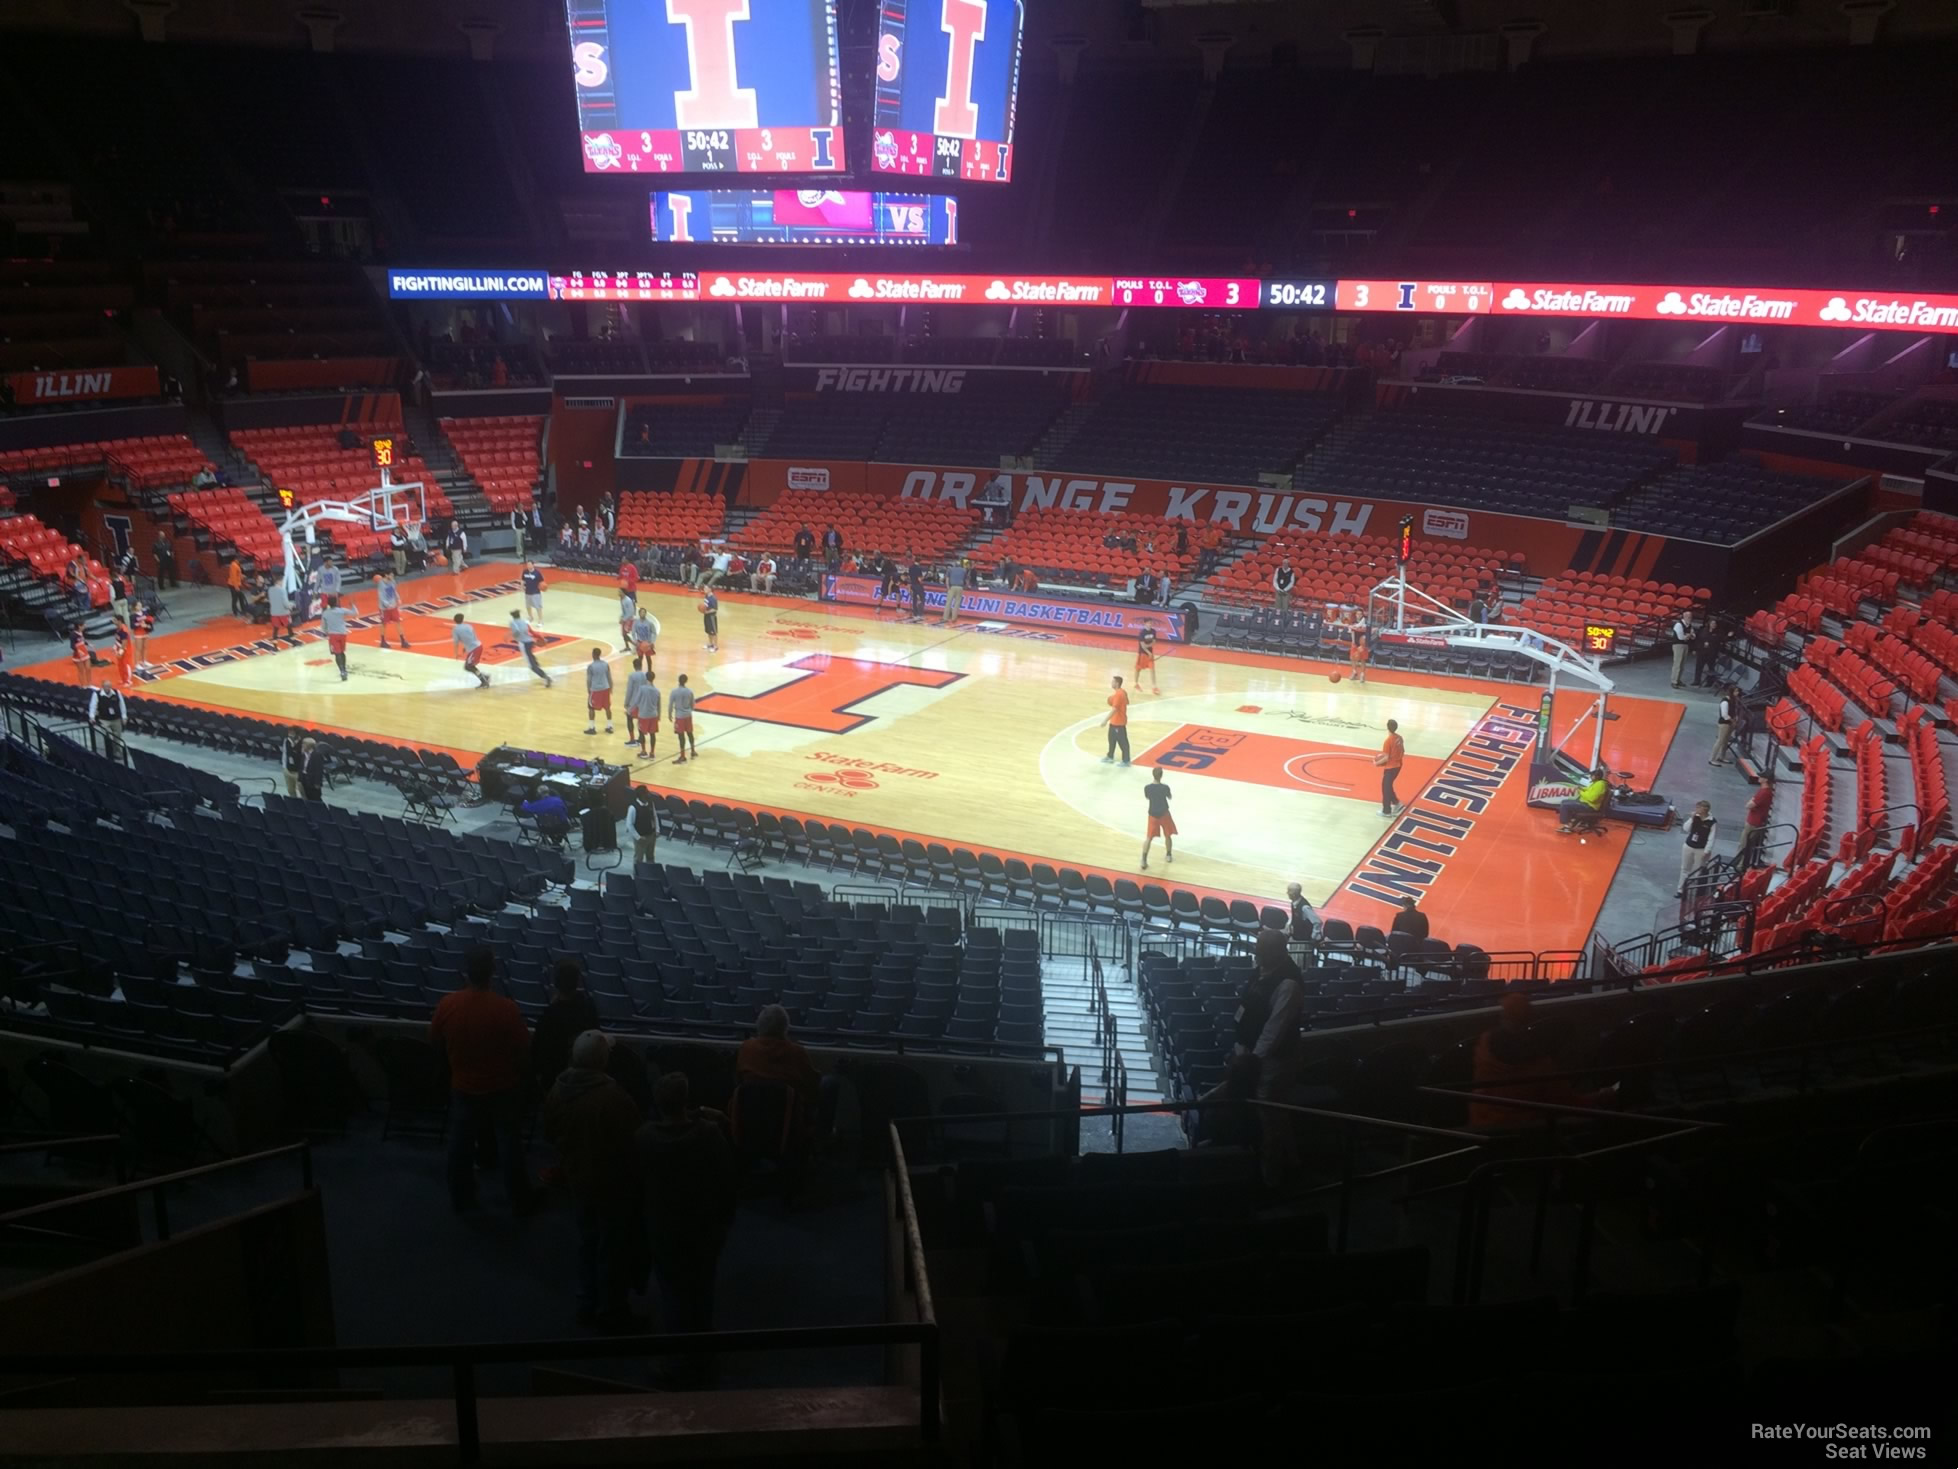 section 141, row 11 seat view  - state farm center